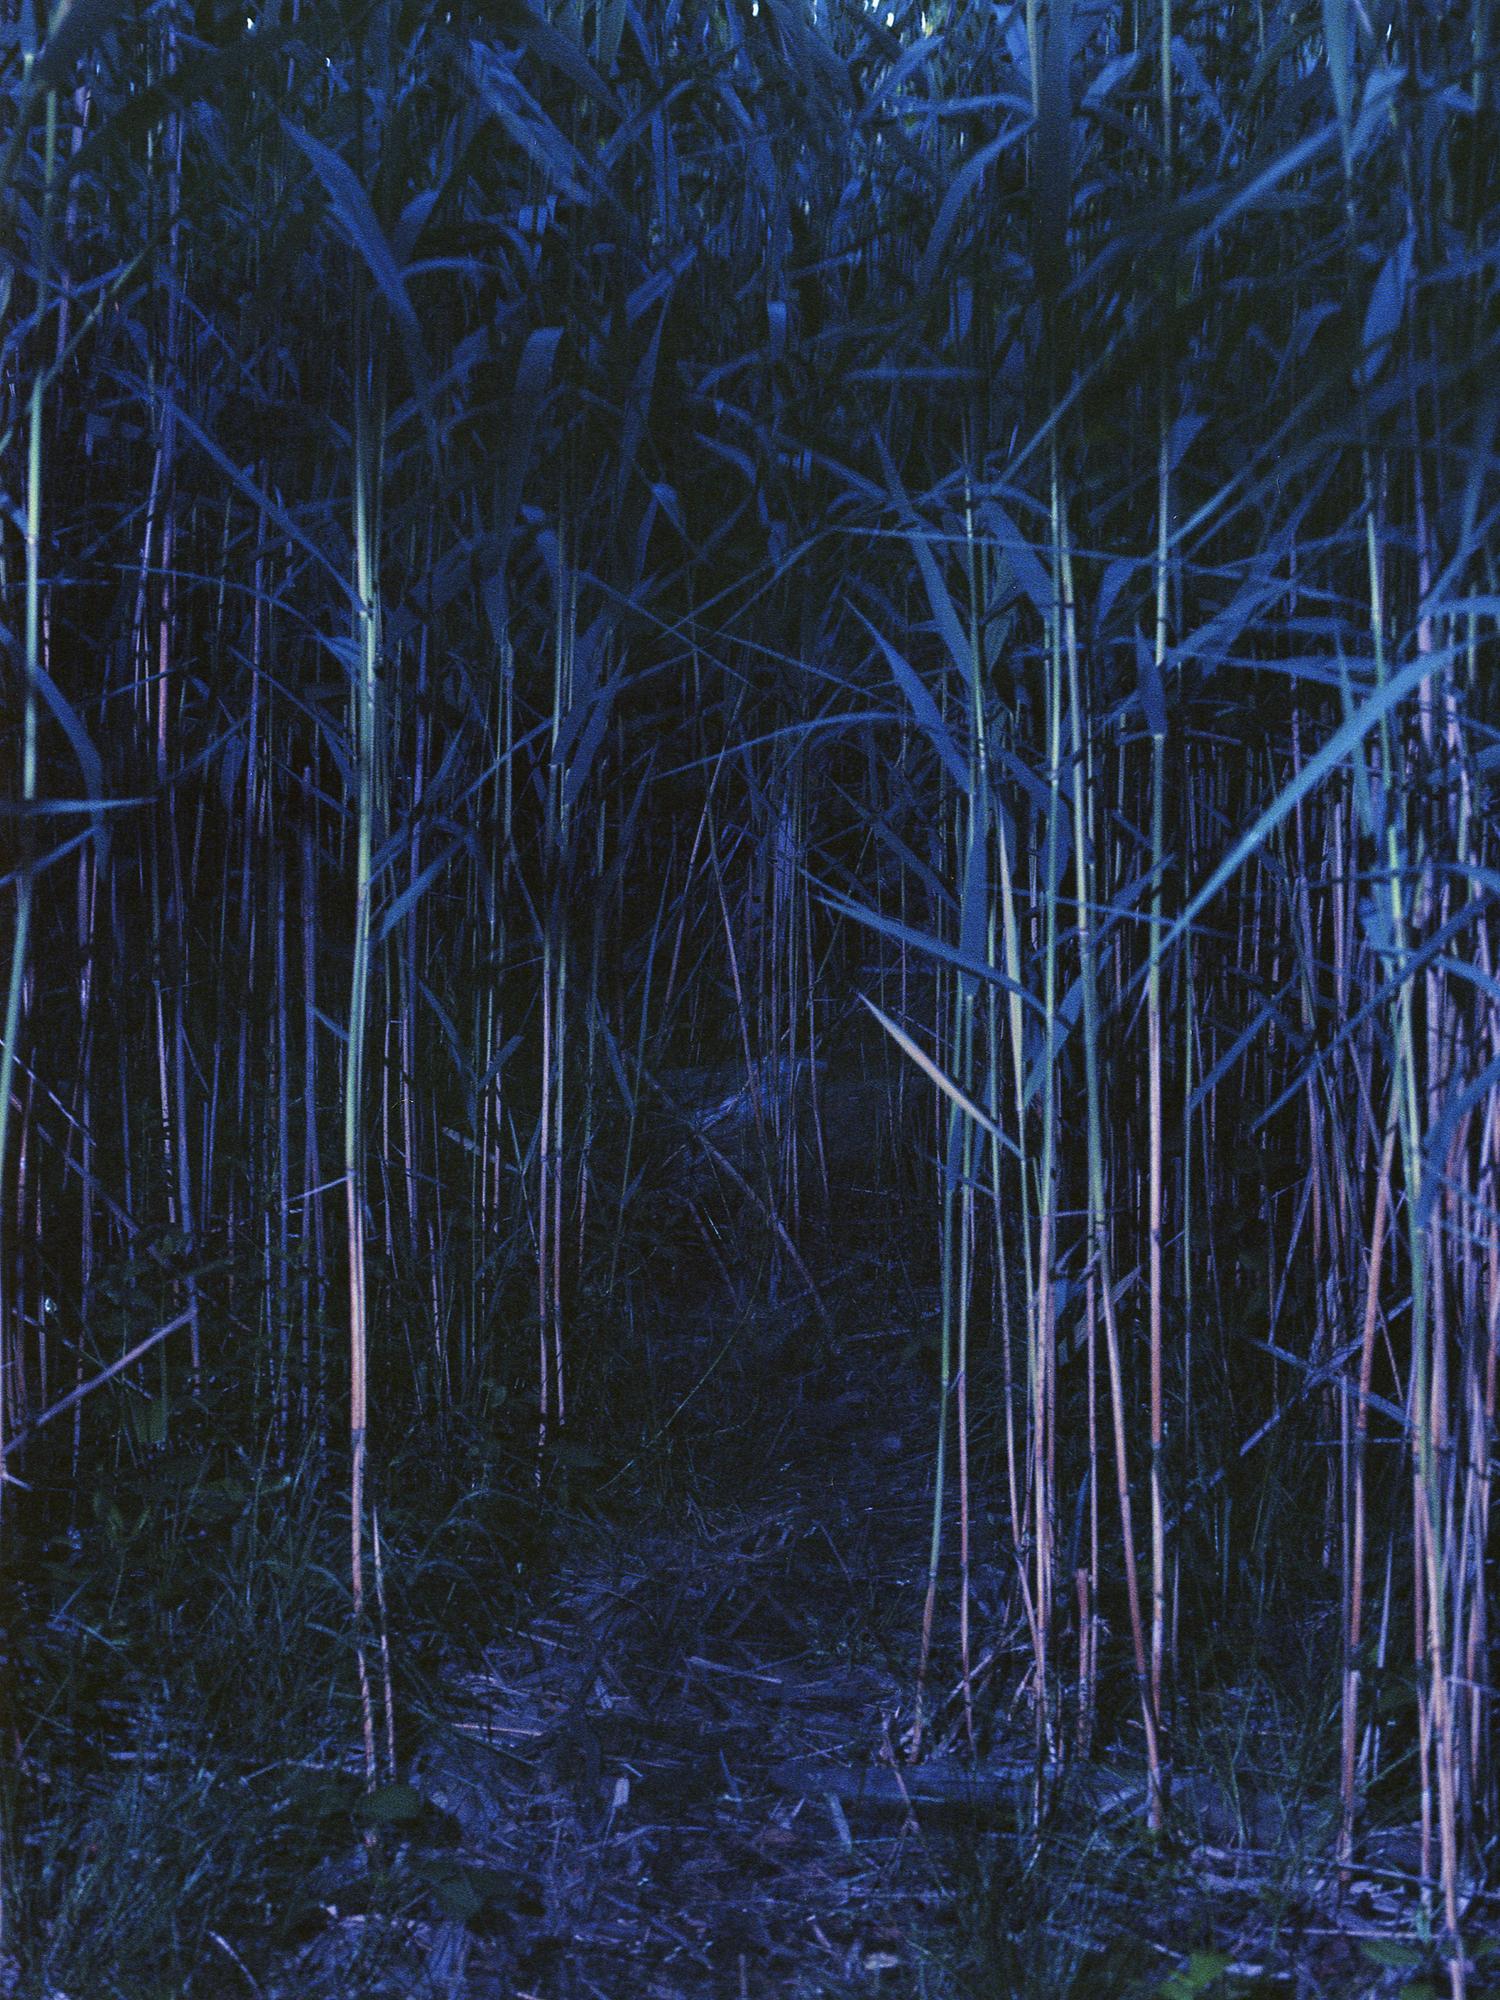 A dark image of tall grass that appears glow-in-the-dark-like.